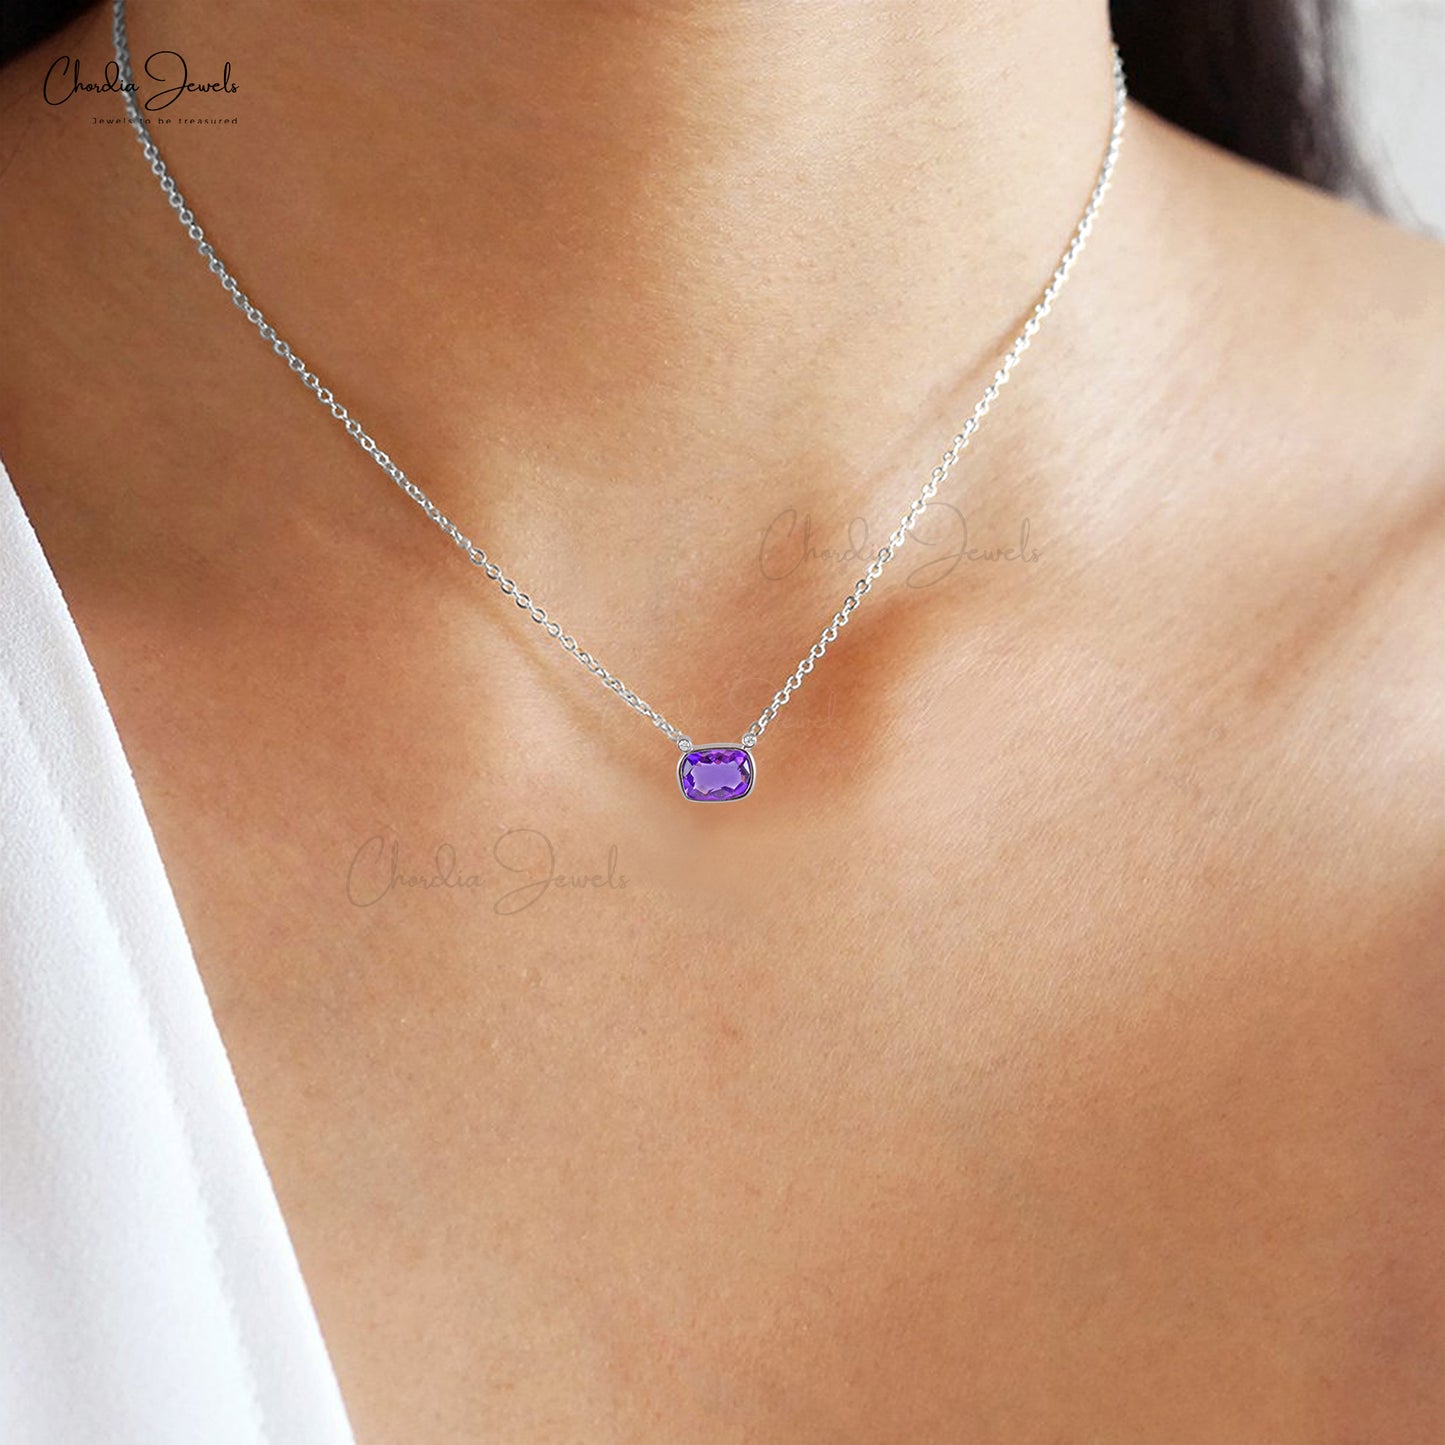 Load image into Gallery viewer, Natural Amethyst and Diamond Necklace in 14k Solid White Gold 8x6mm Recta Cushion Cut Gemstone Bezel Necklace
